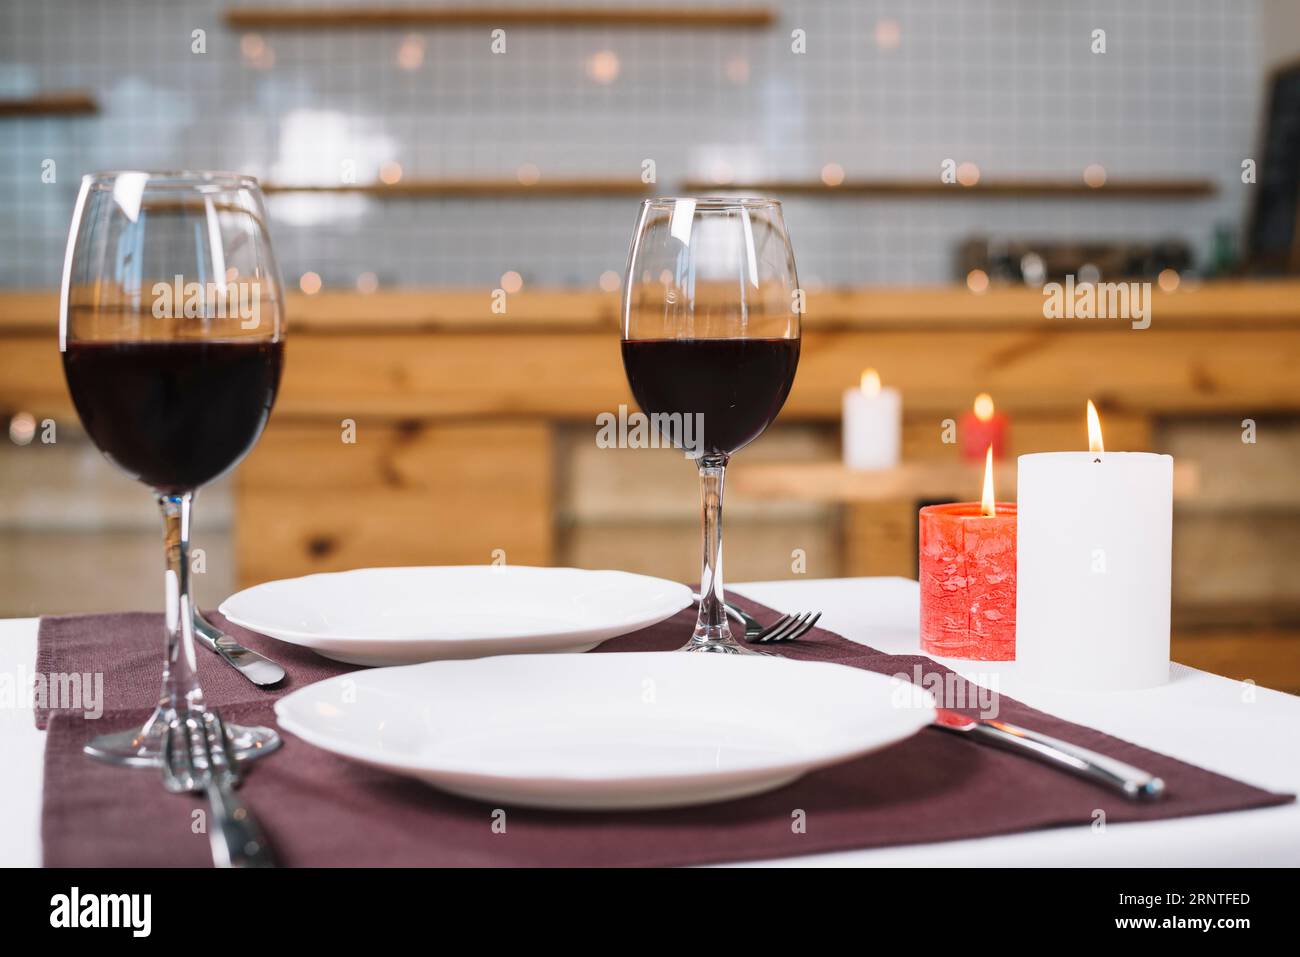 Romantic dinner table with wine glasses Stock Photo